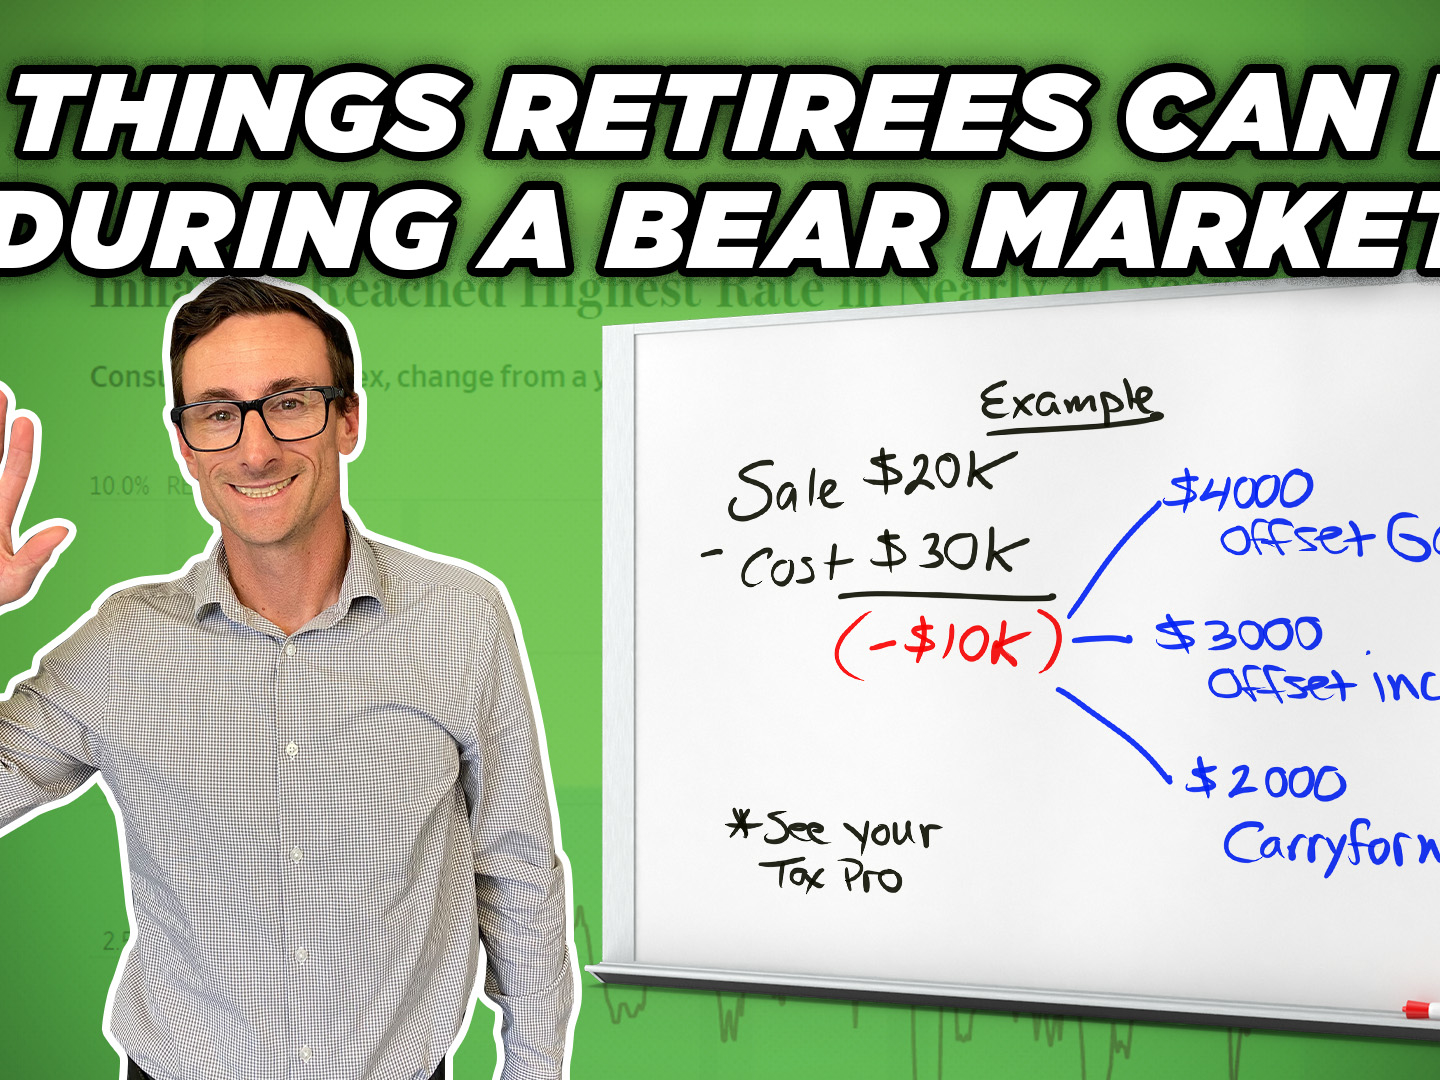 5 Things Retirees Should Do in a Bear Market